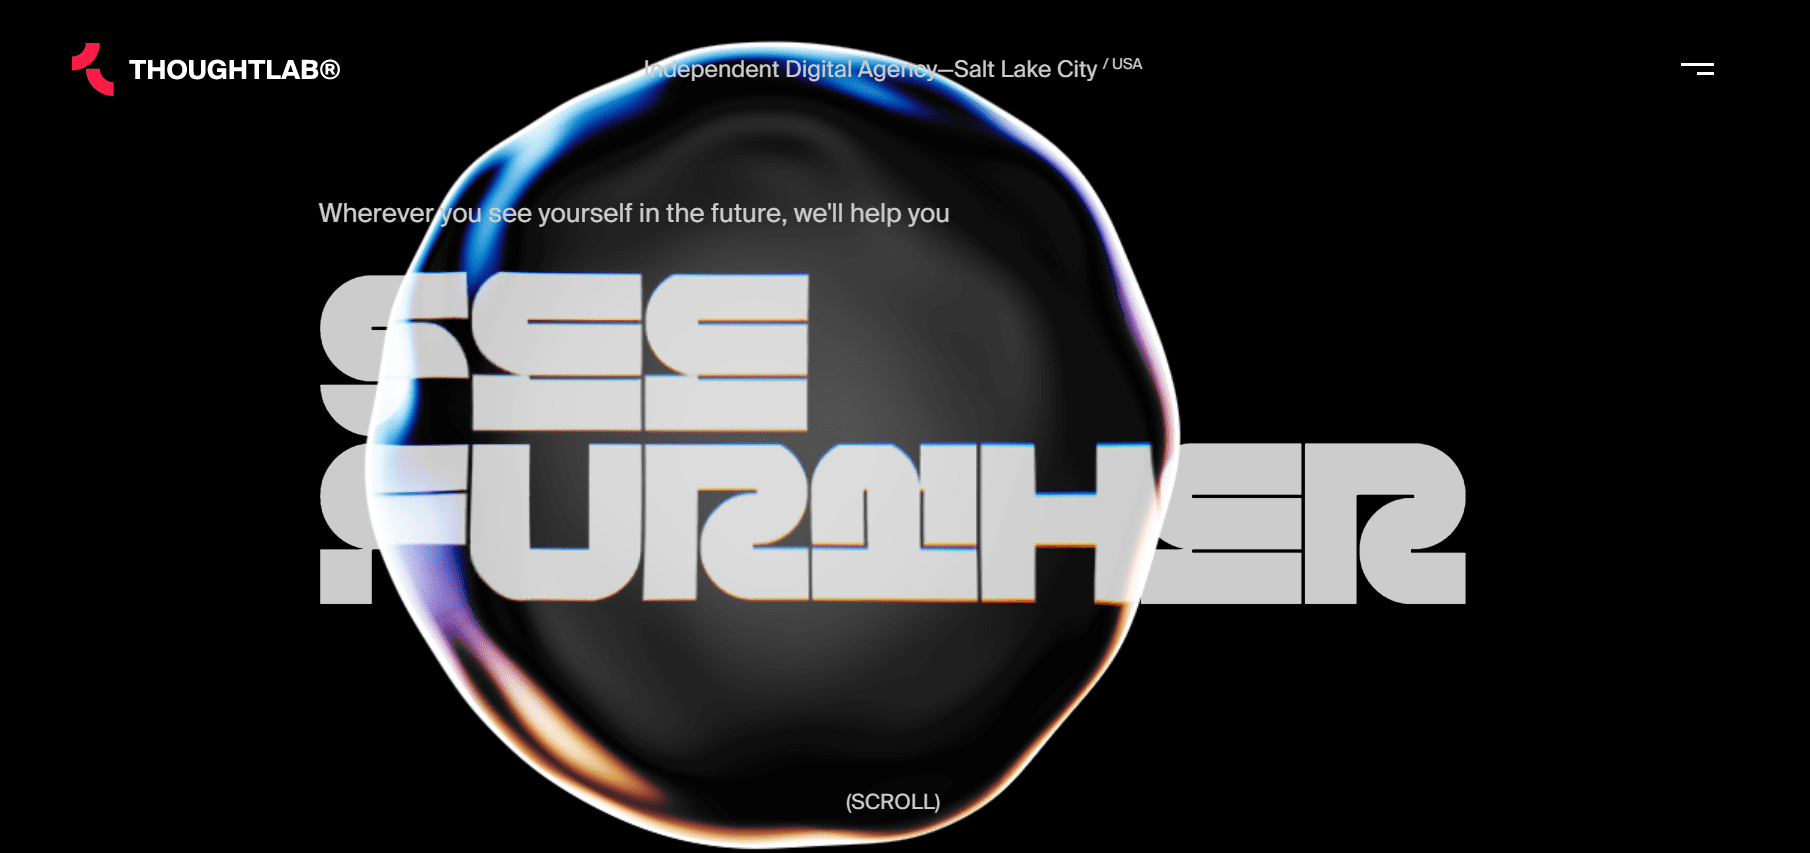 Thoughtlab's home page shows lettering and in the foreground is a circular element that mimics liquid.